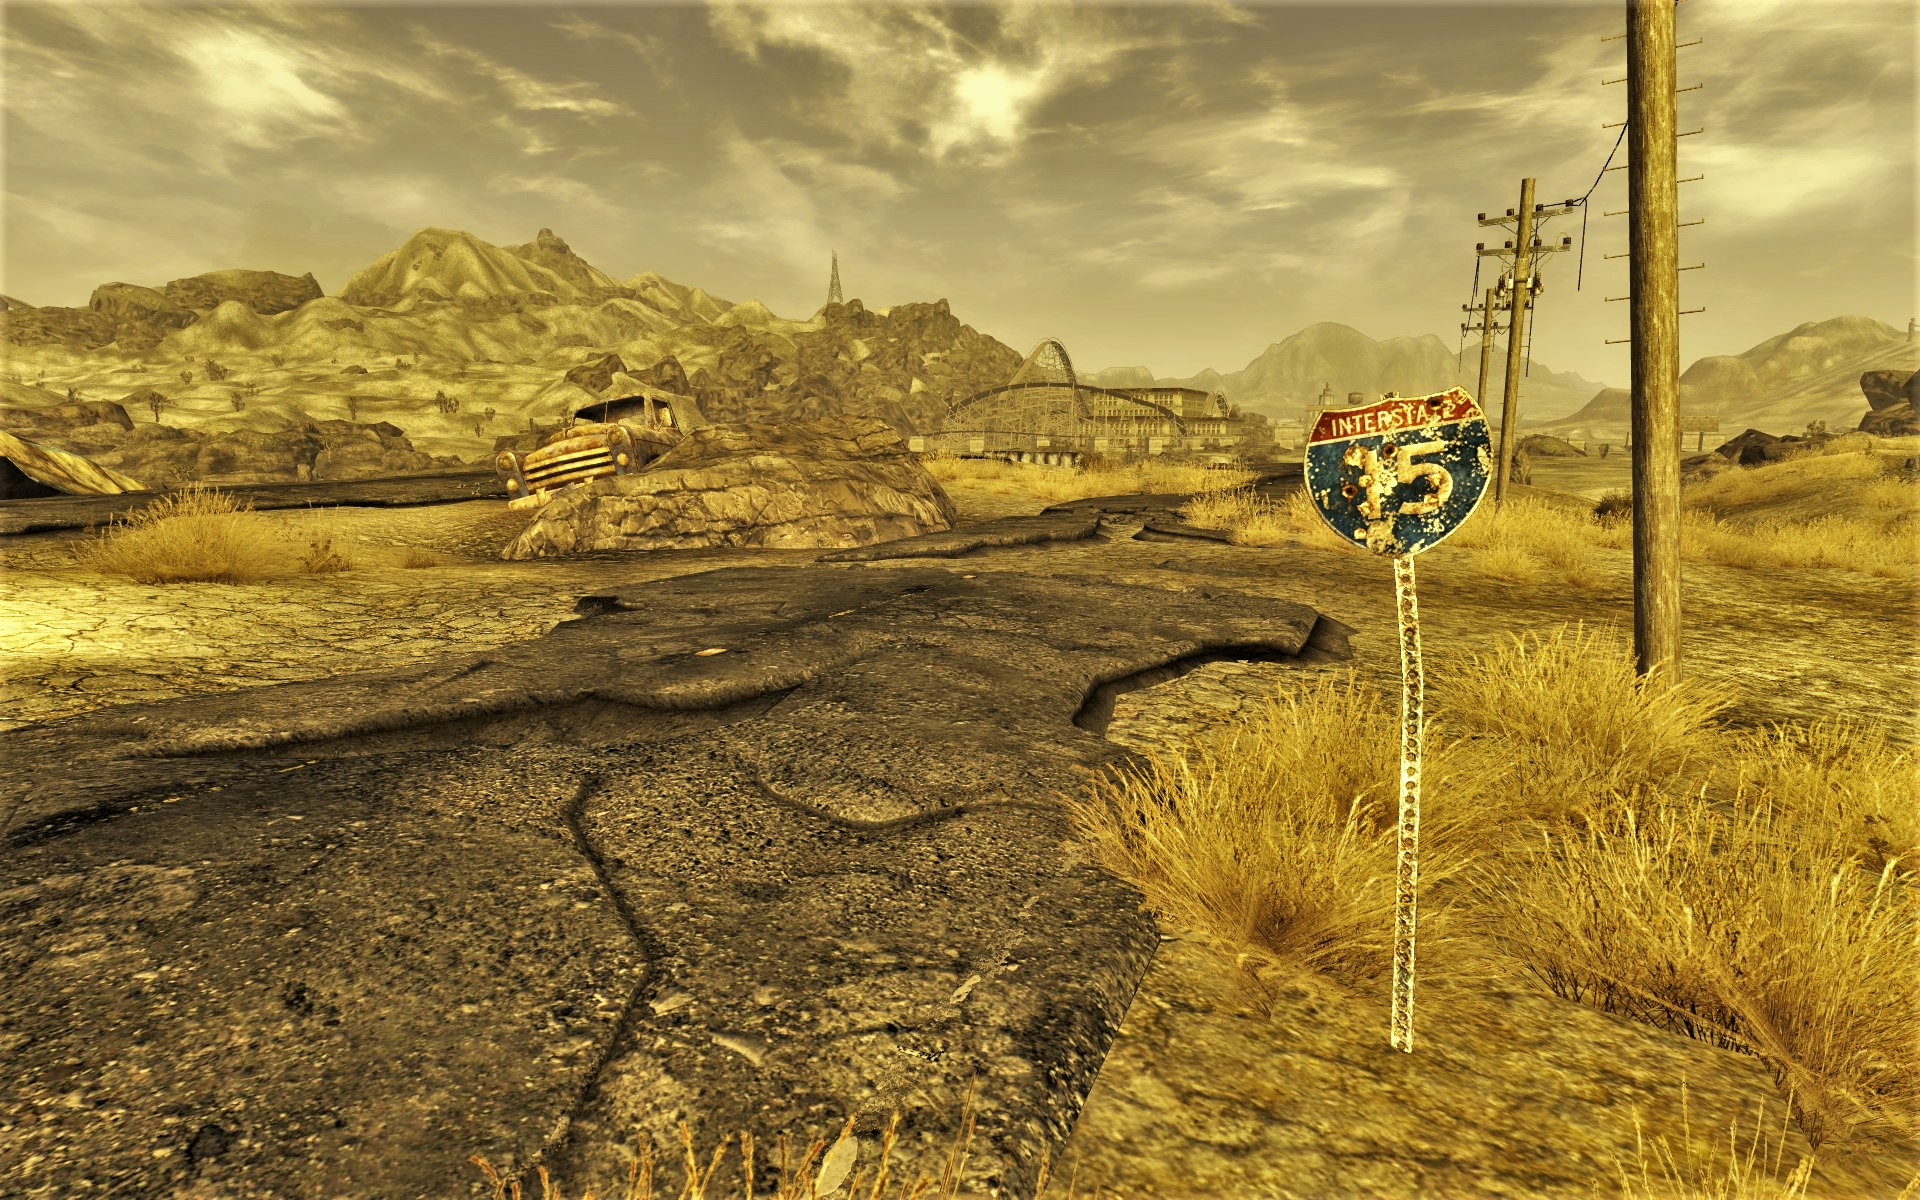 Dry Lake - Independent Fallout Wiki